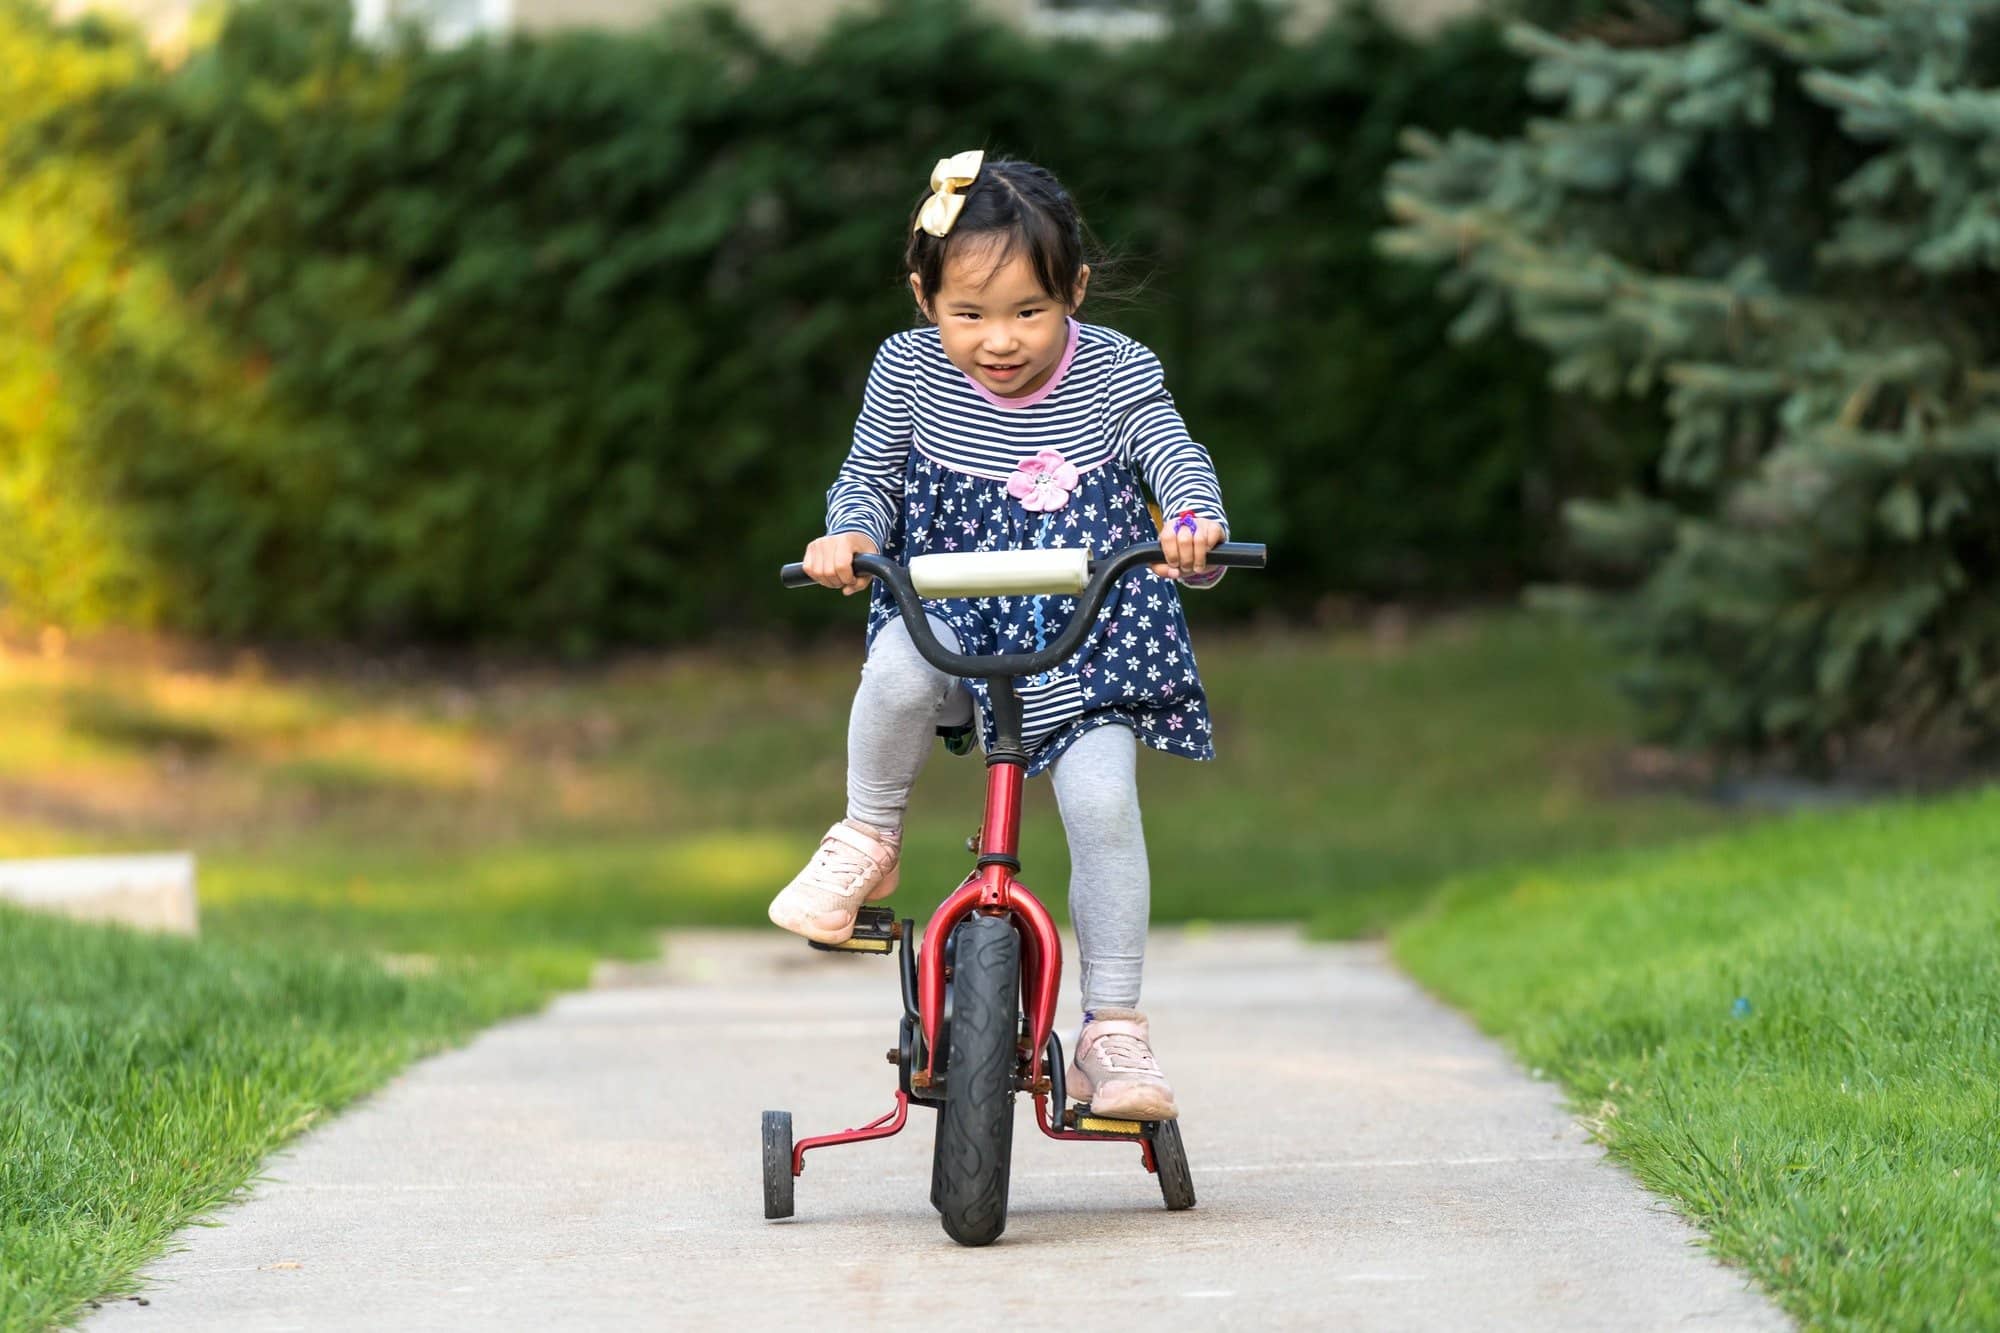 Cute little girl learning ride a bicycle with no helmet